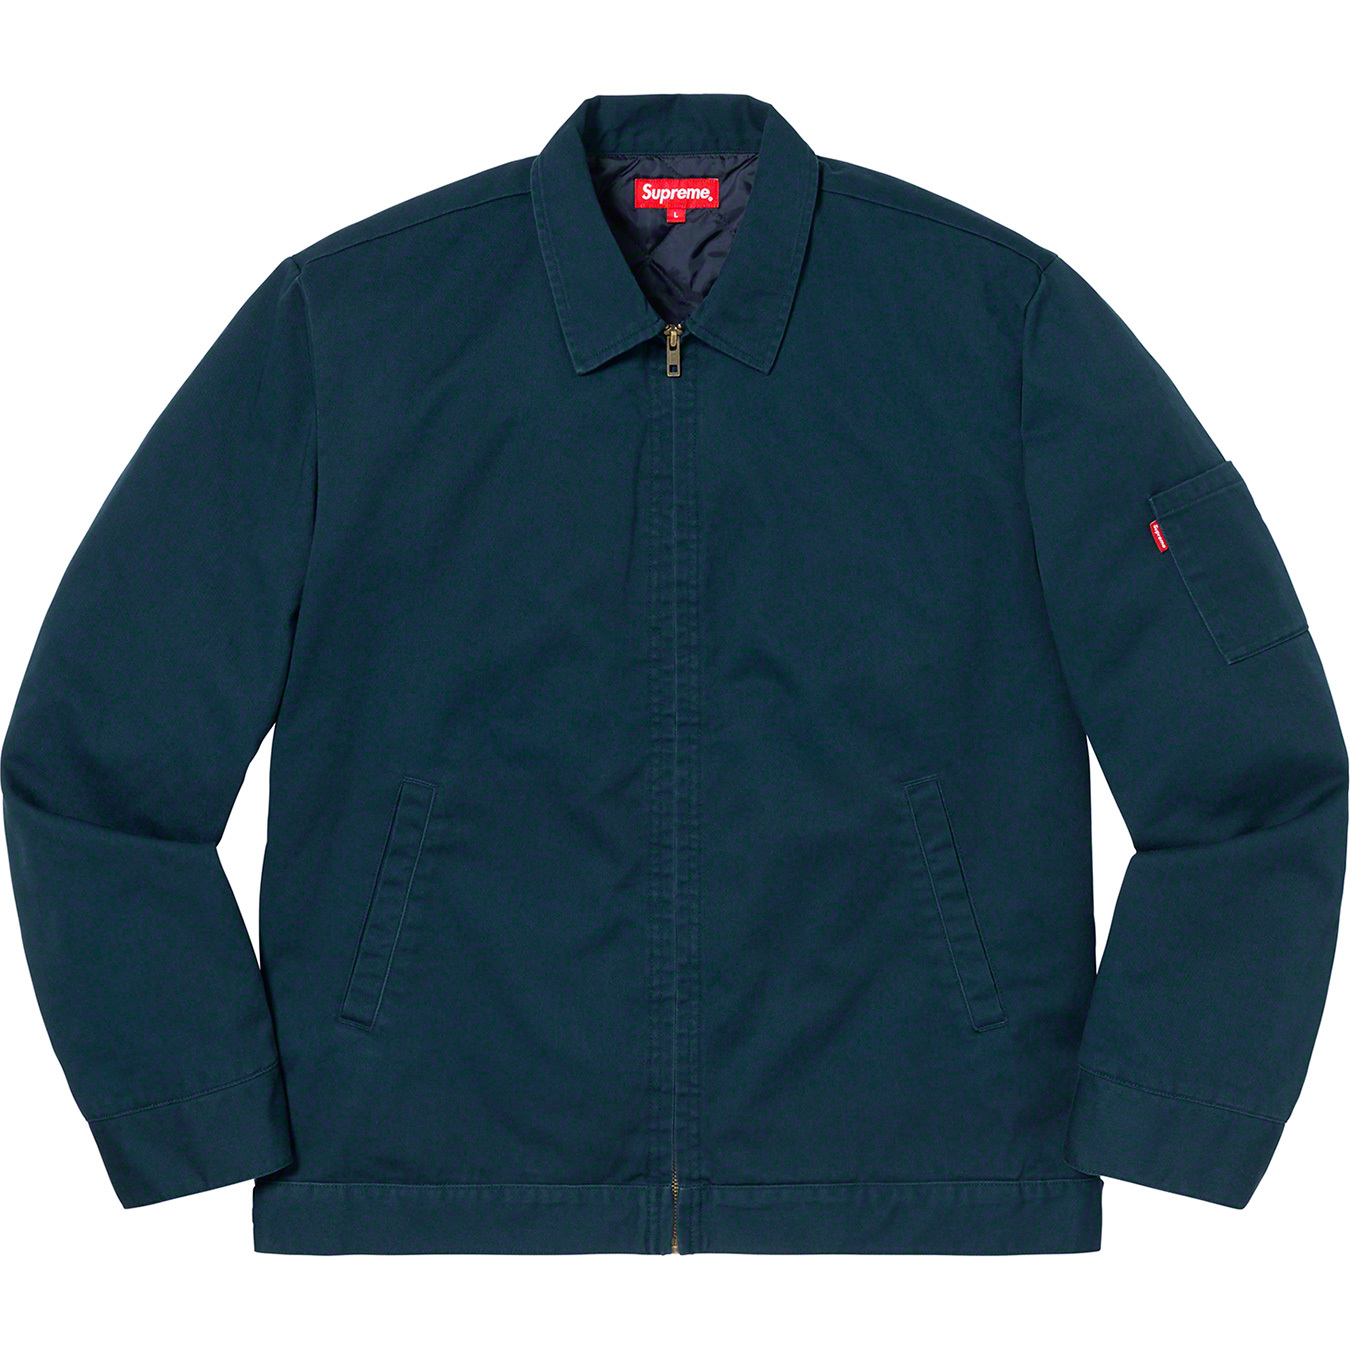 Cop Car Embroidered Work Jacket - fall winter 2019 - Supreme